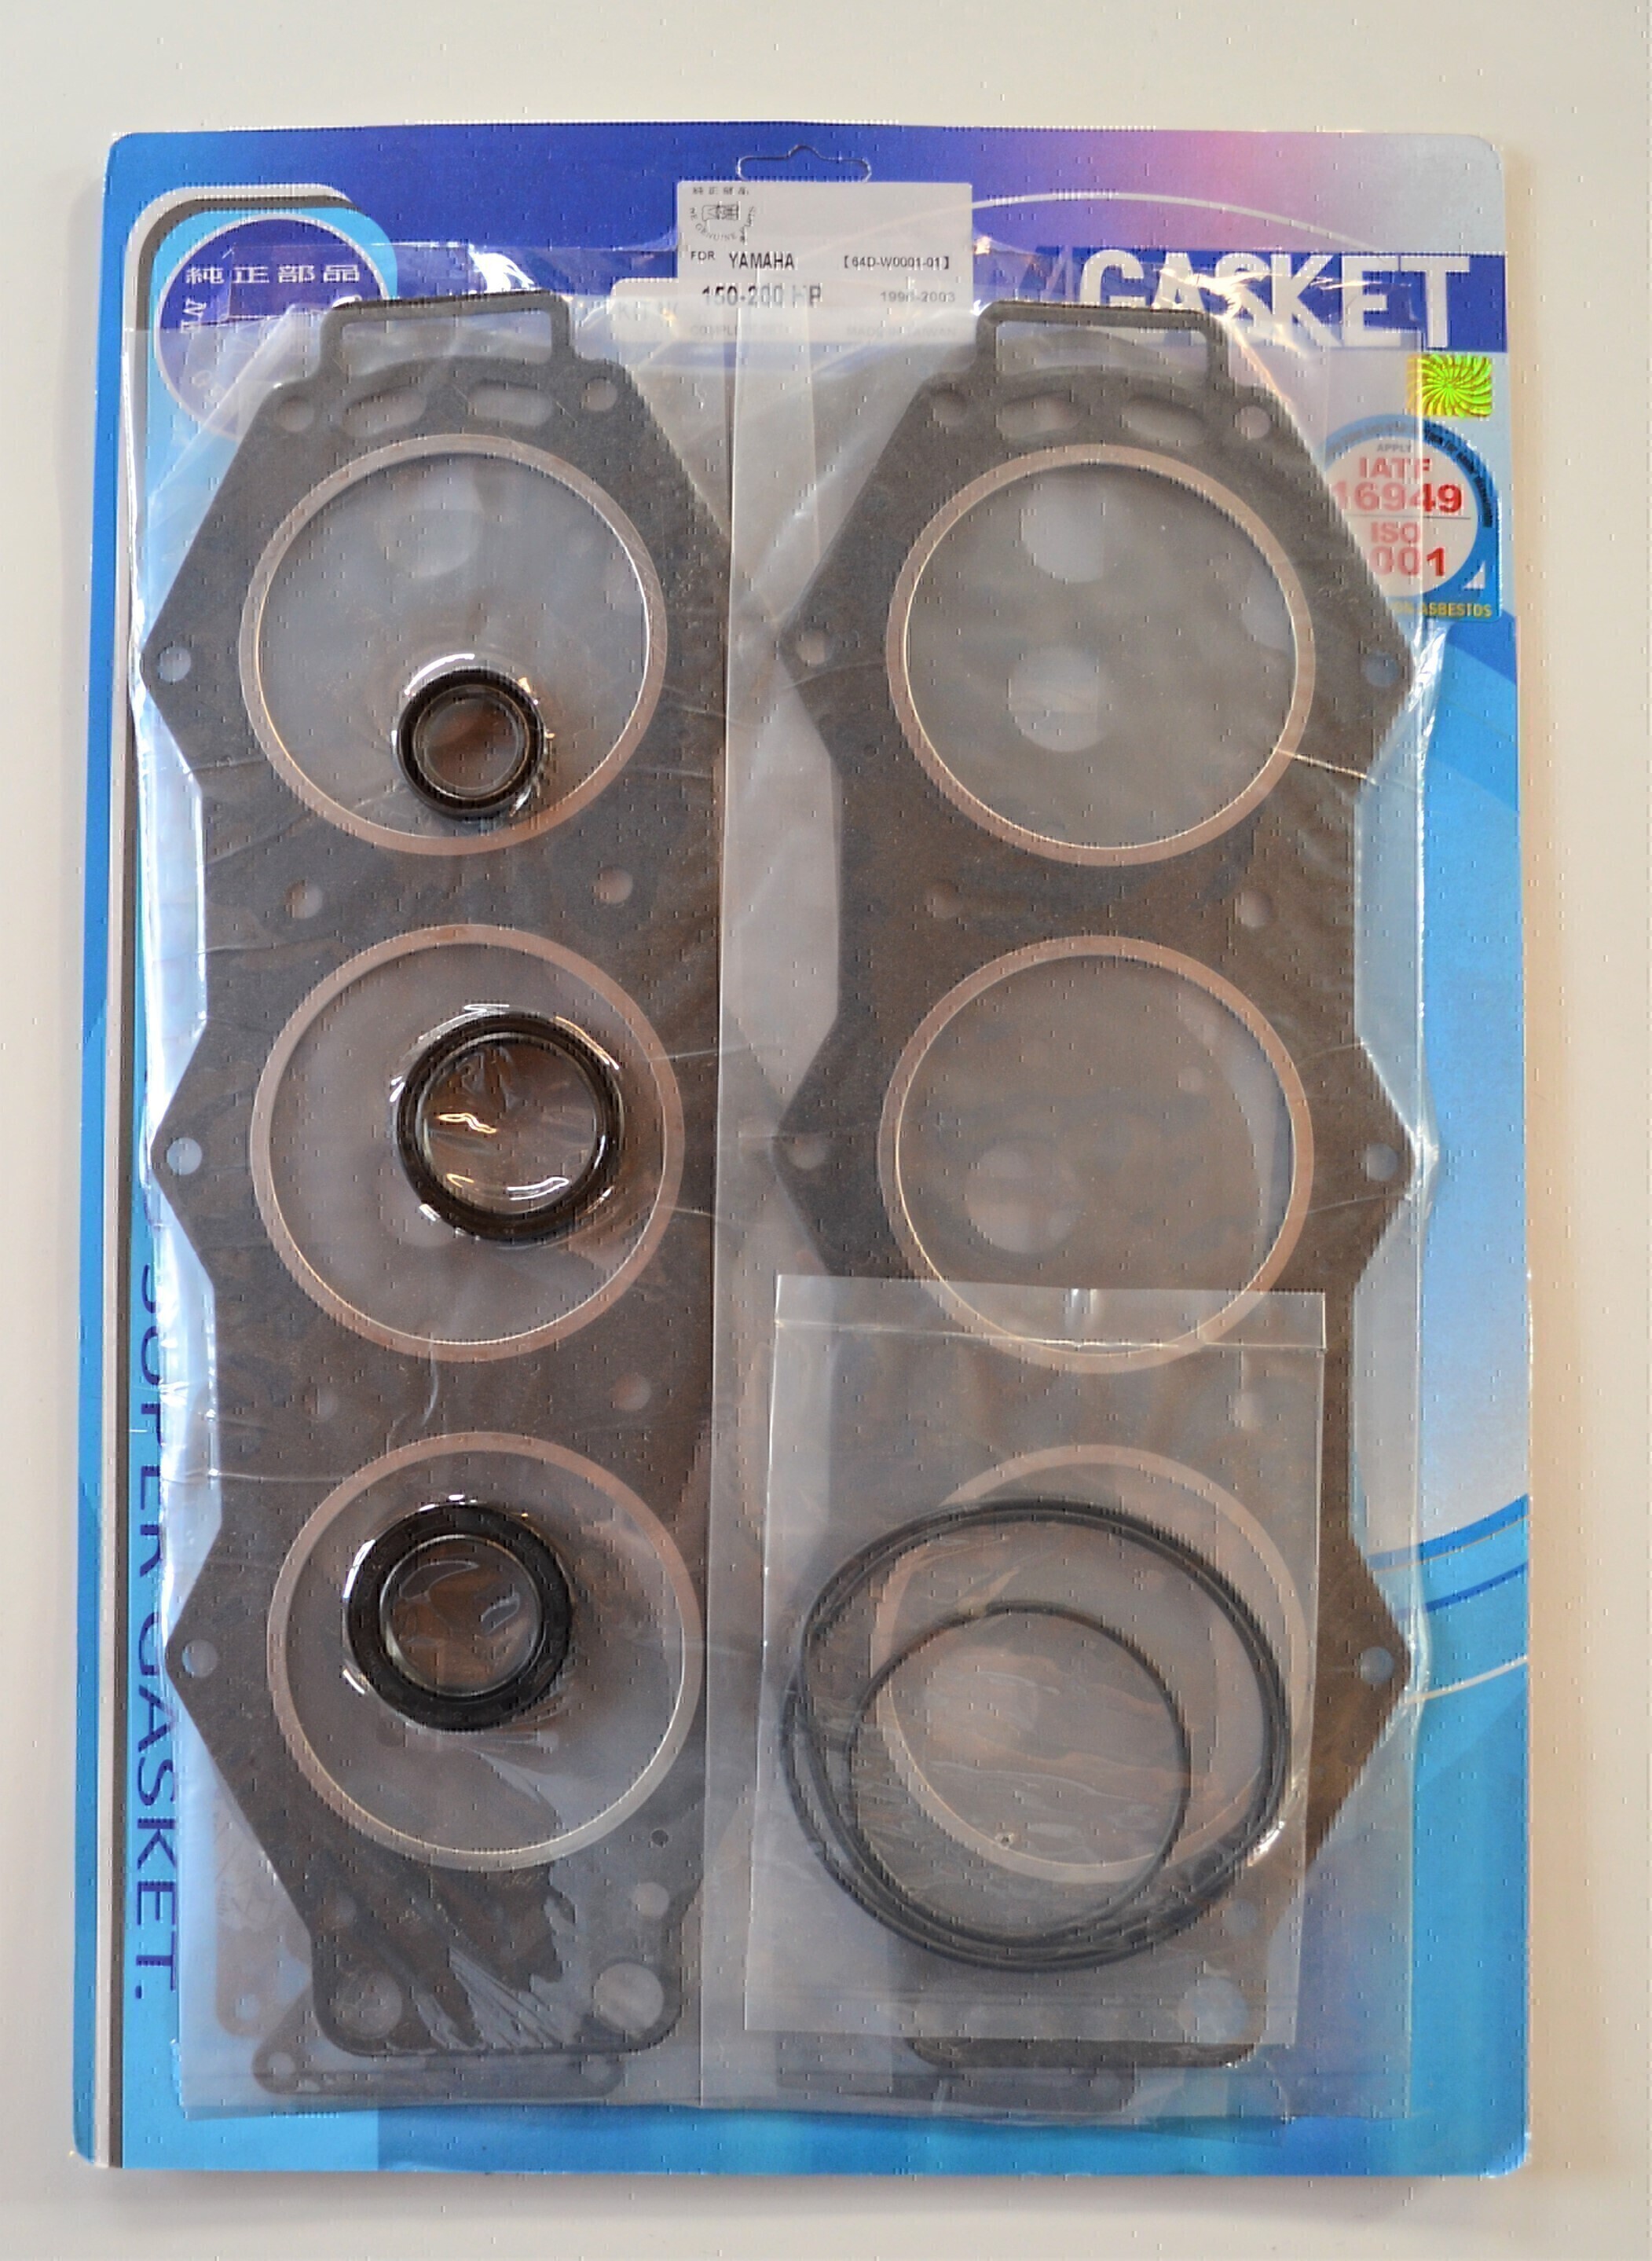 POWER HEAD GASKET KIT FOR YAMAHA 150HP - 175HP OUTBOARD MOTOR # 64D-W0001-01